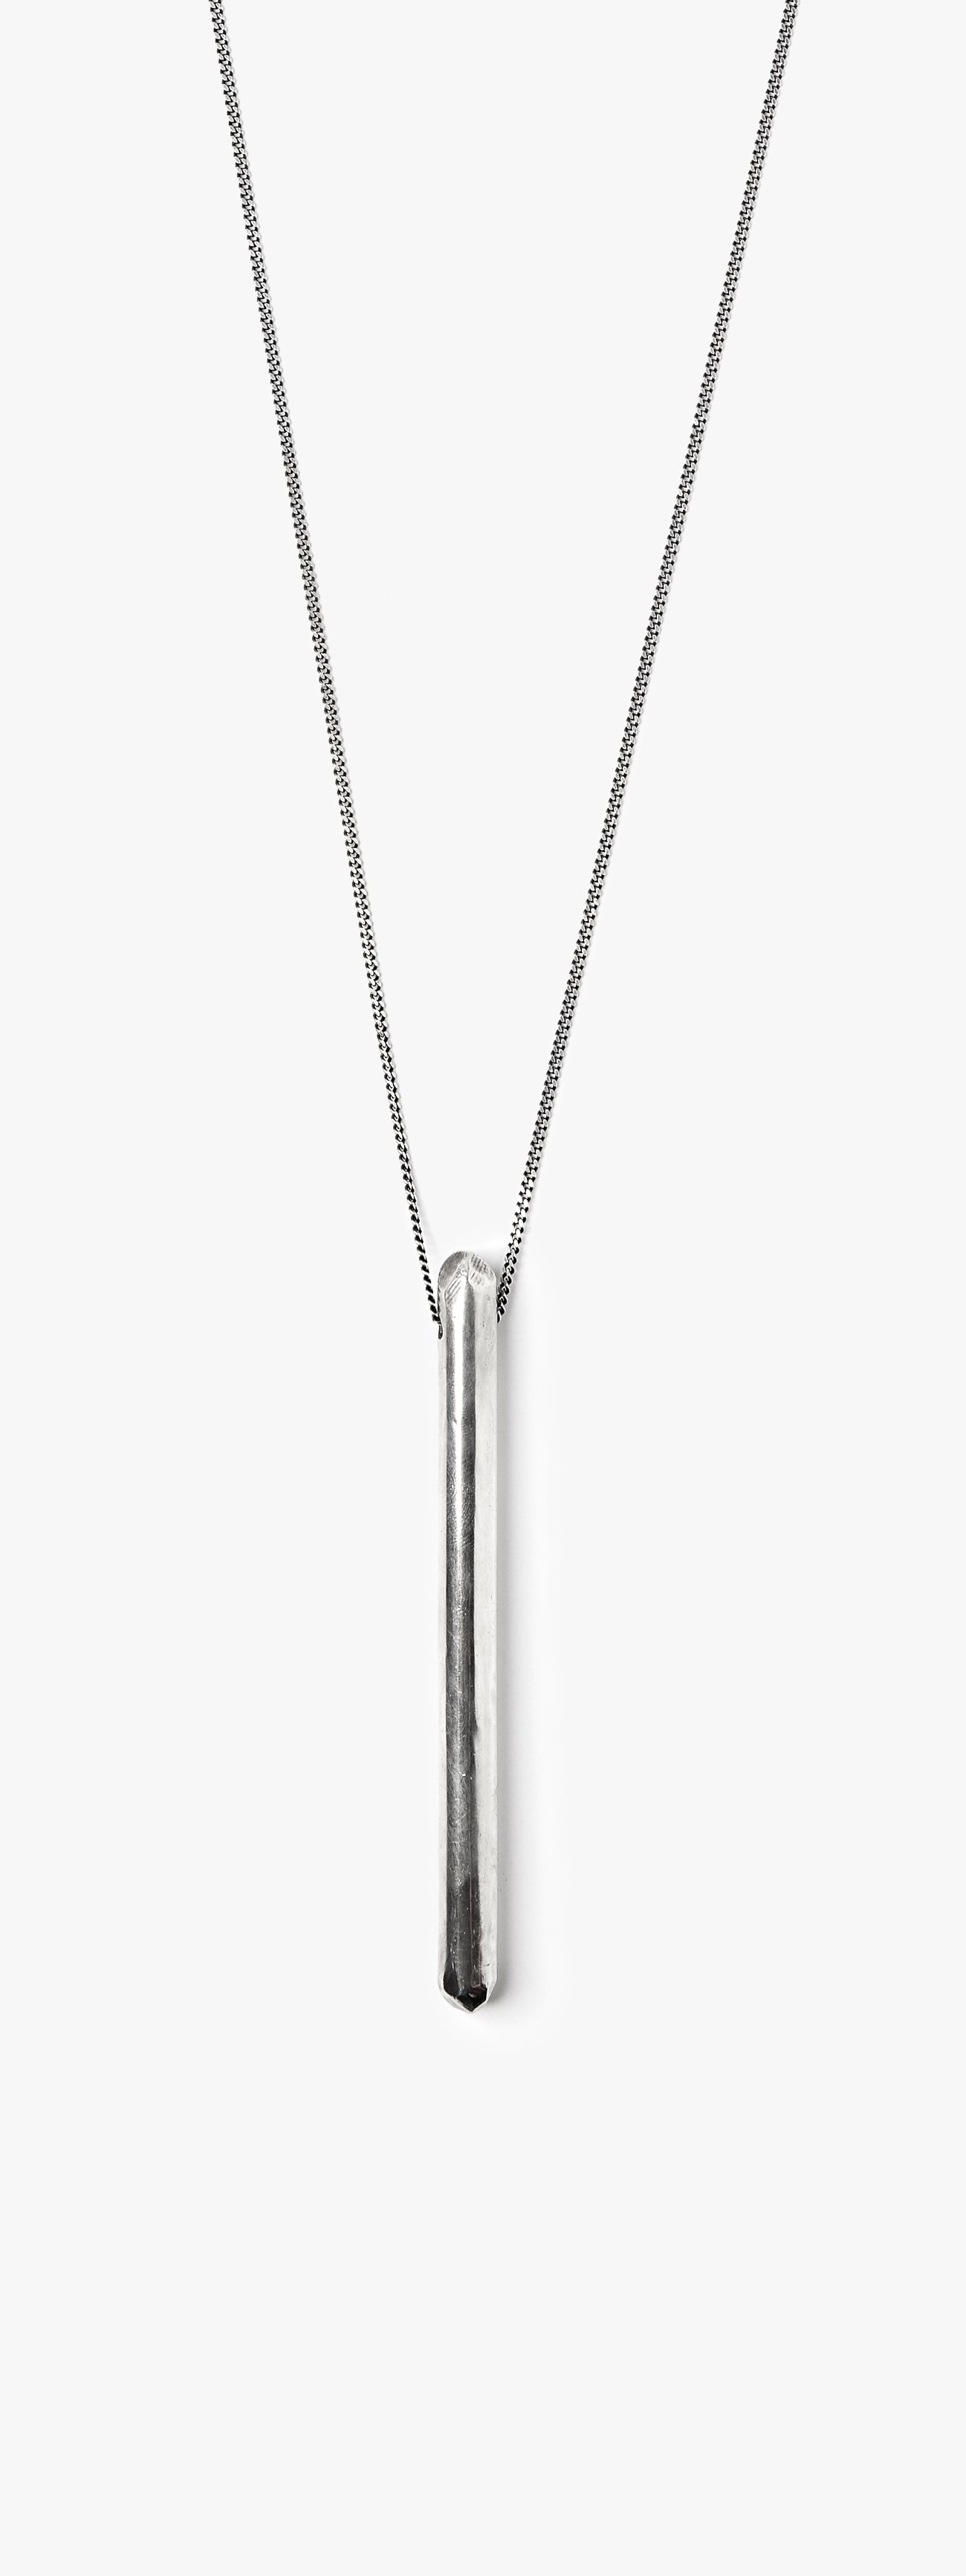 3.5" SOLID ROD NECKLACE 044